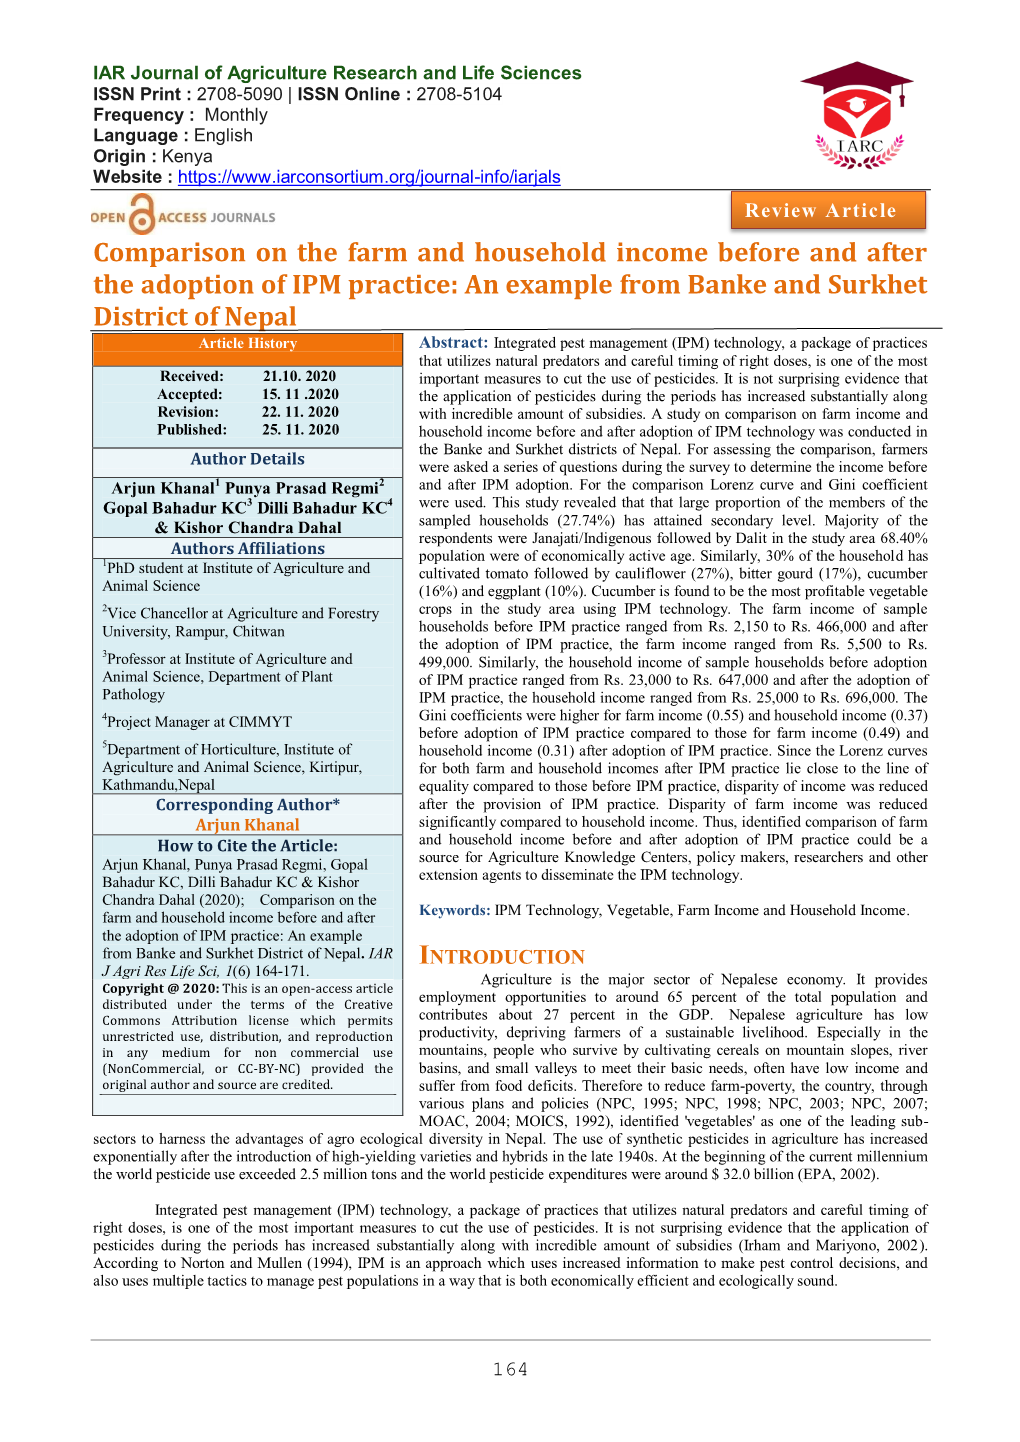 Comparison on the Farm and Household Income Before